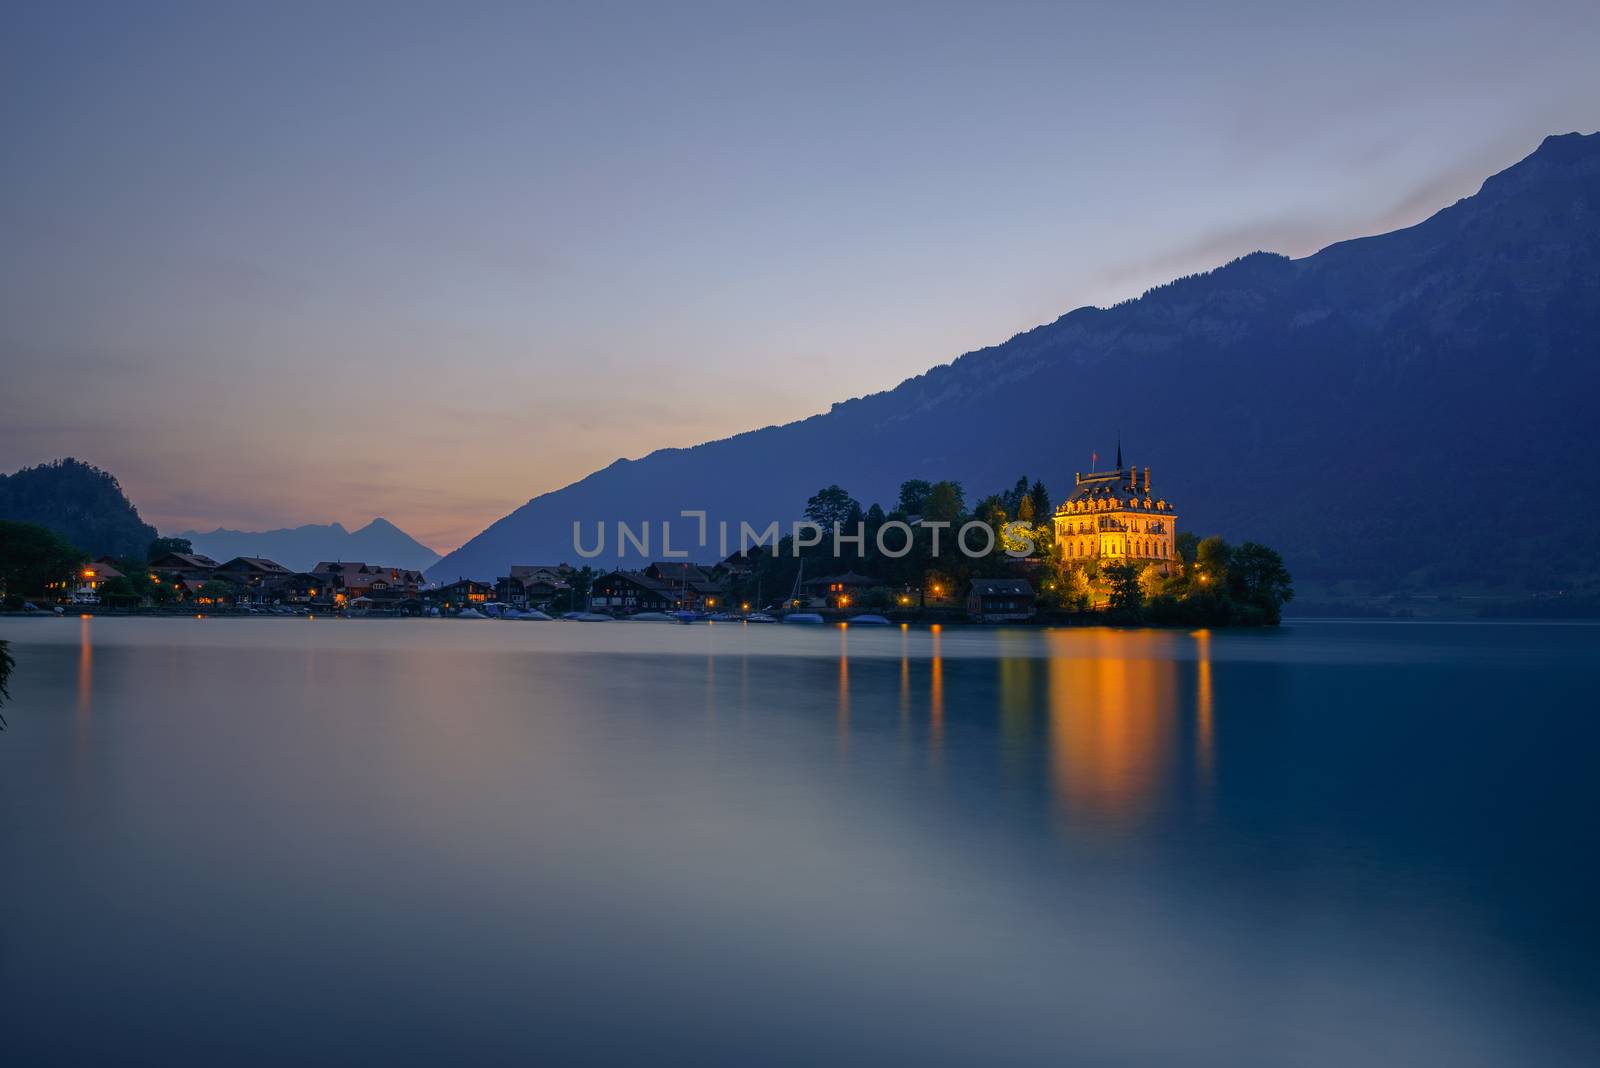 Sunset at the Iseltwald peninsula and forme castle in Switzerland, now Rehabilitation Center of Seeburg. Long exposure.